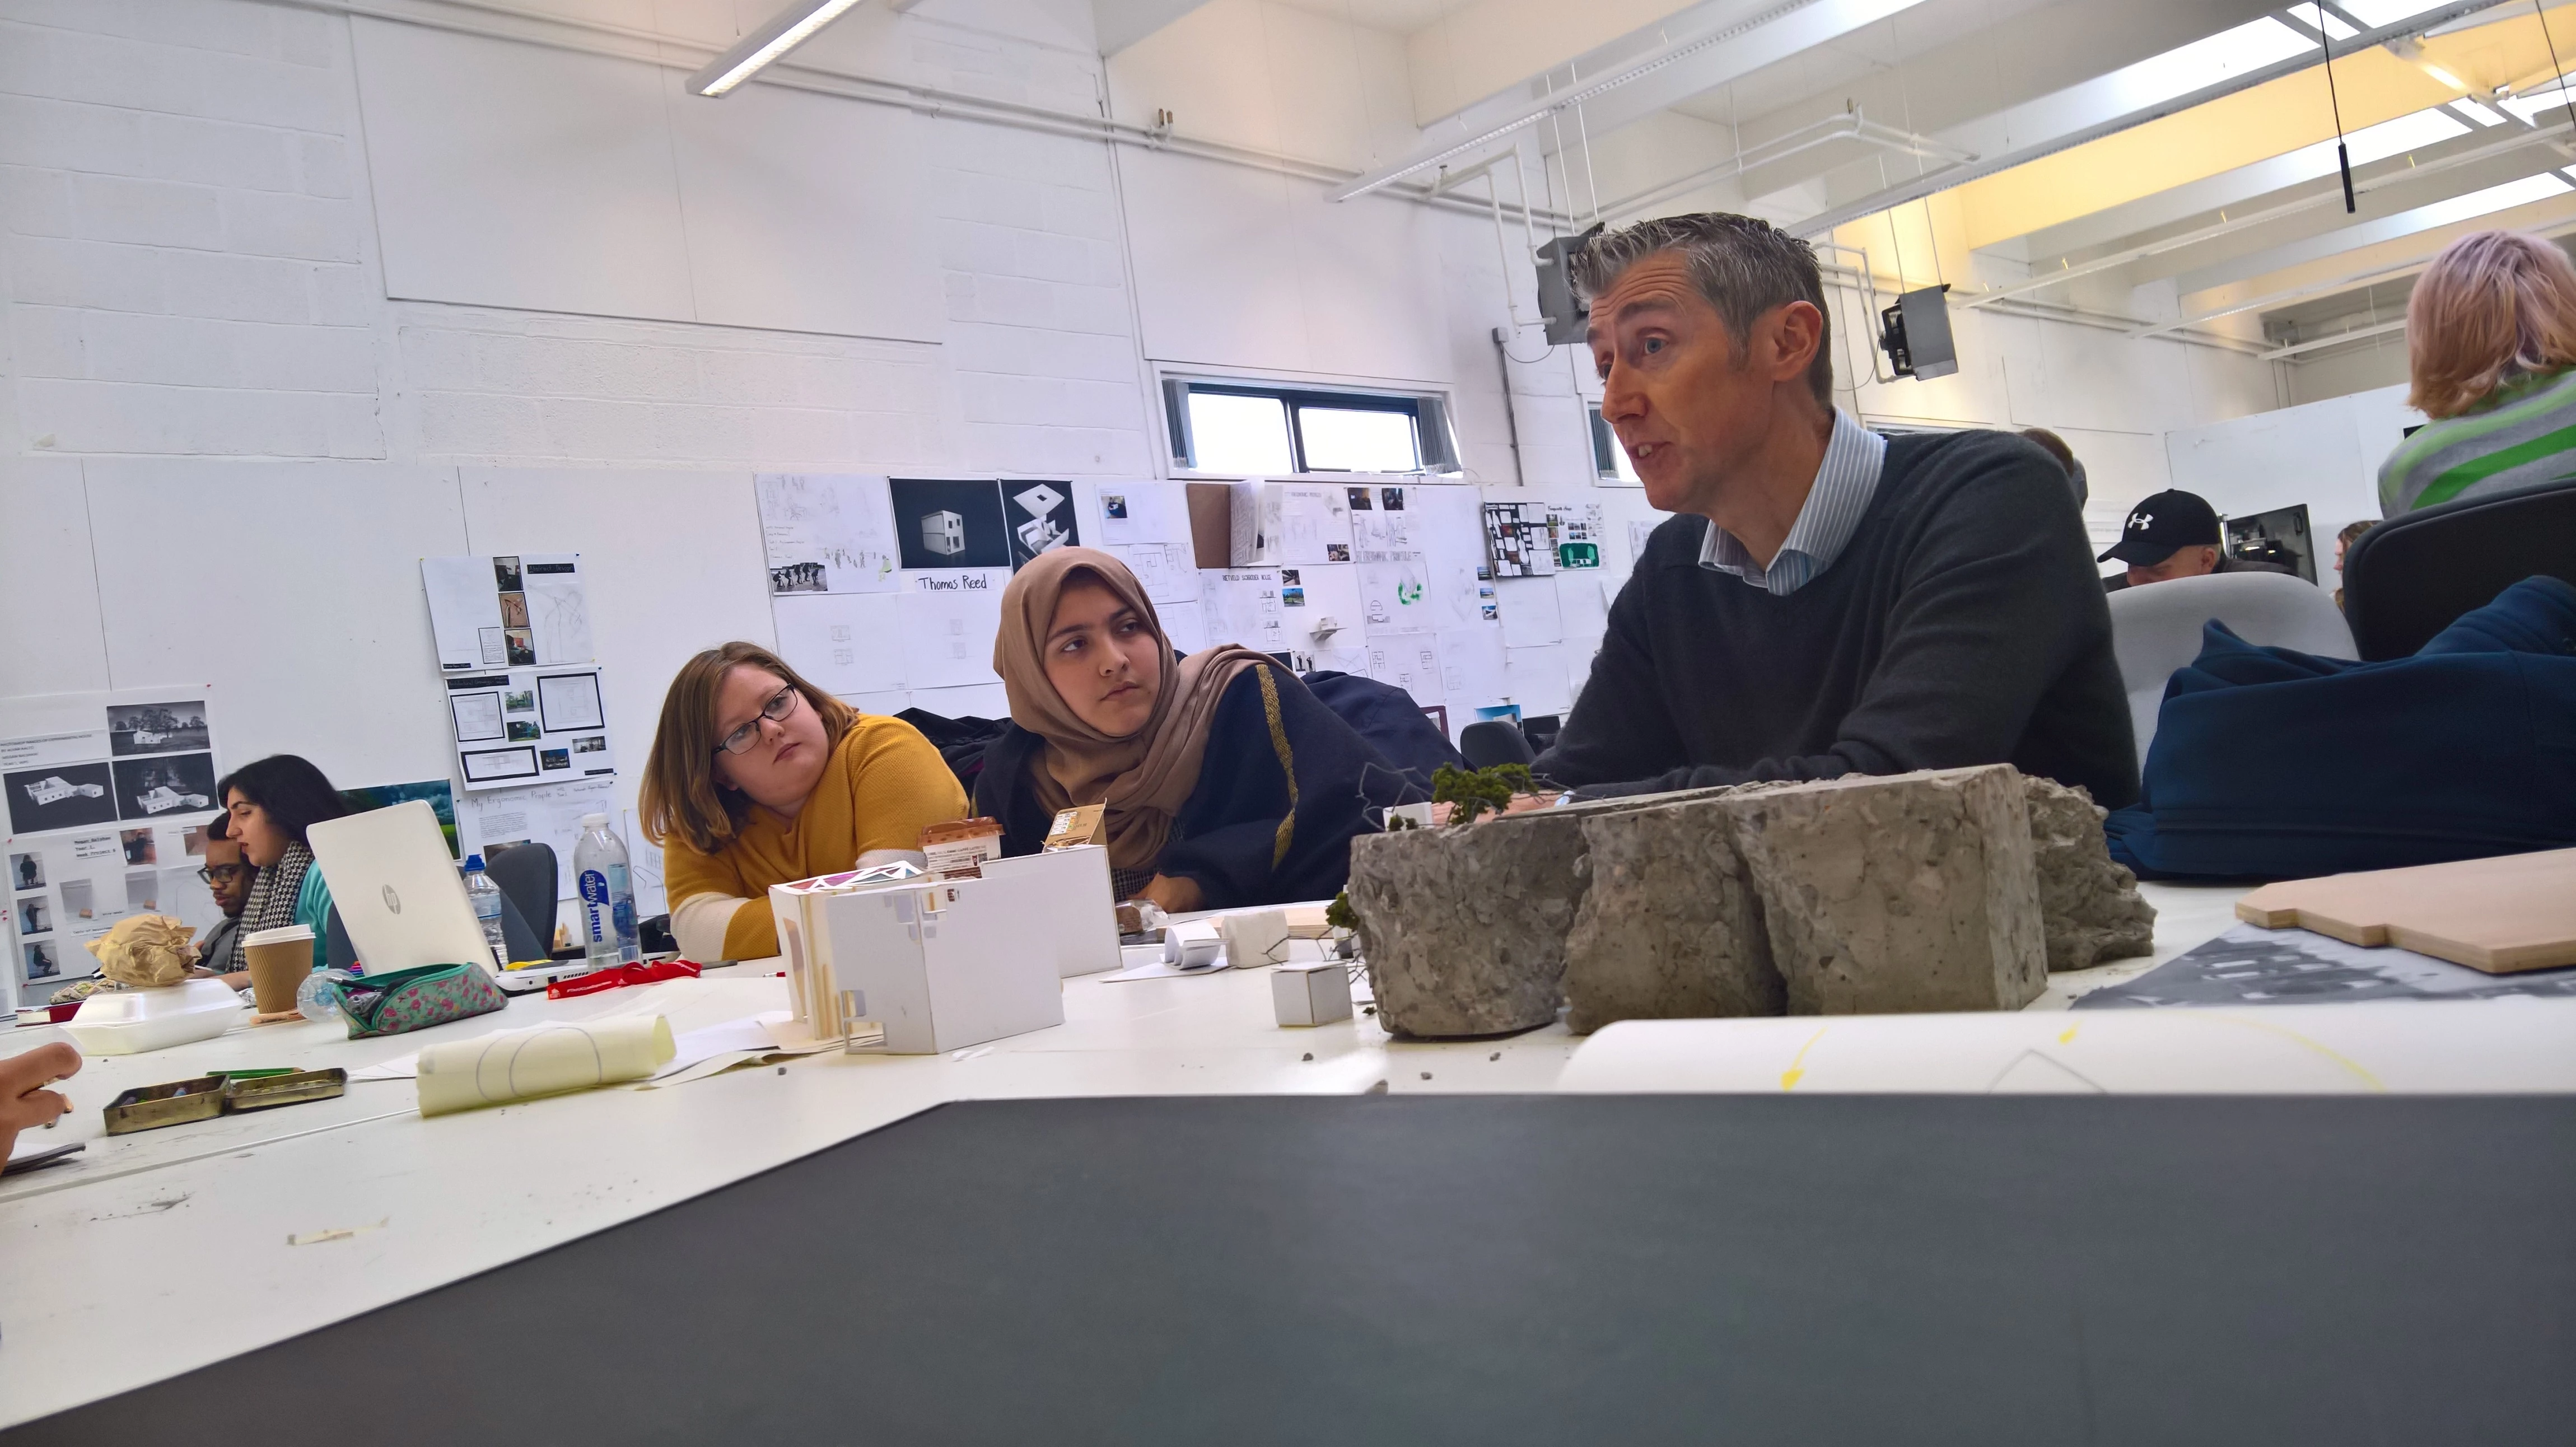  Architecture students at the University of Central Lancashire (UCLan) are gaining valuable industry experience 